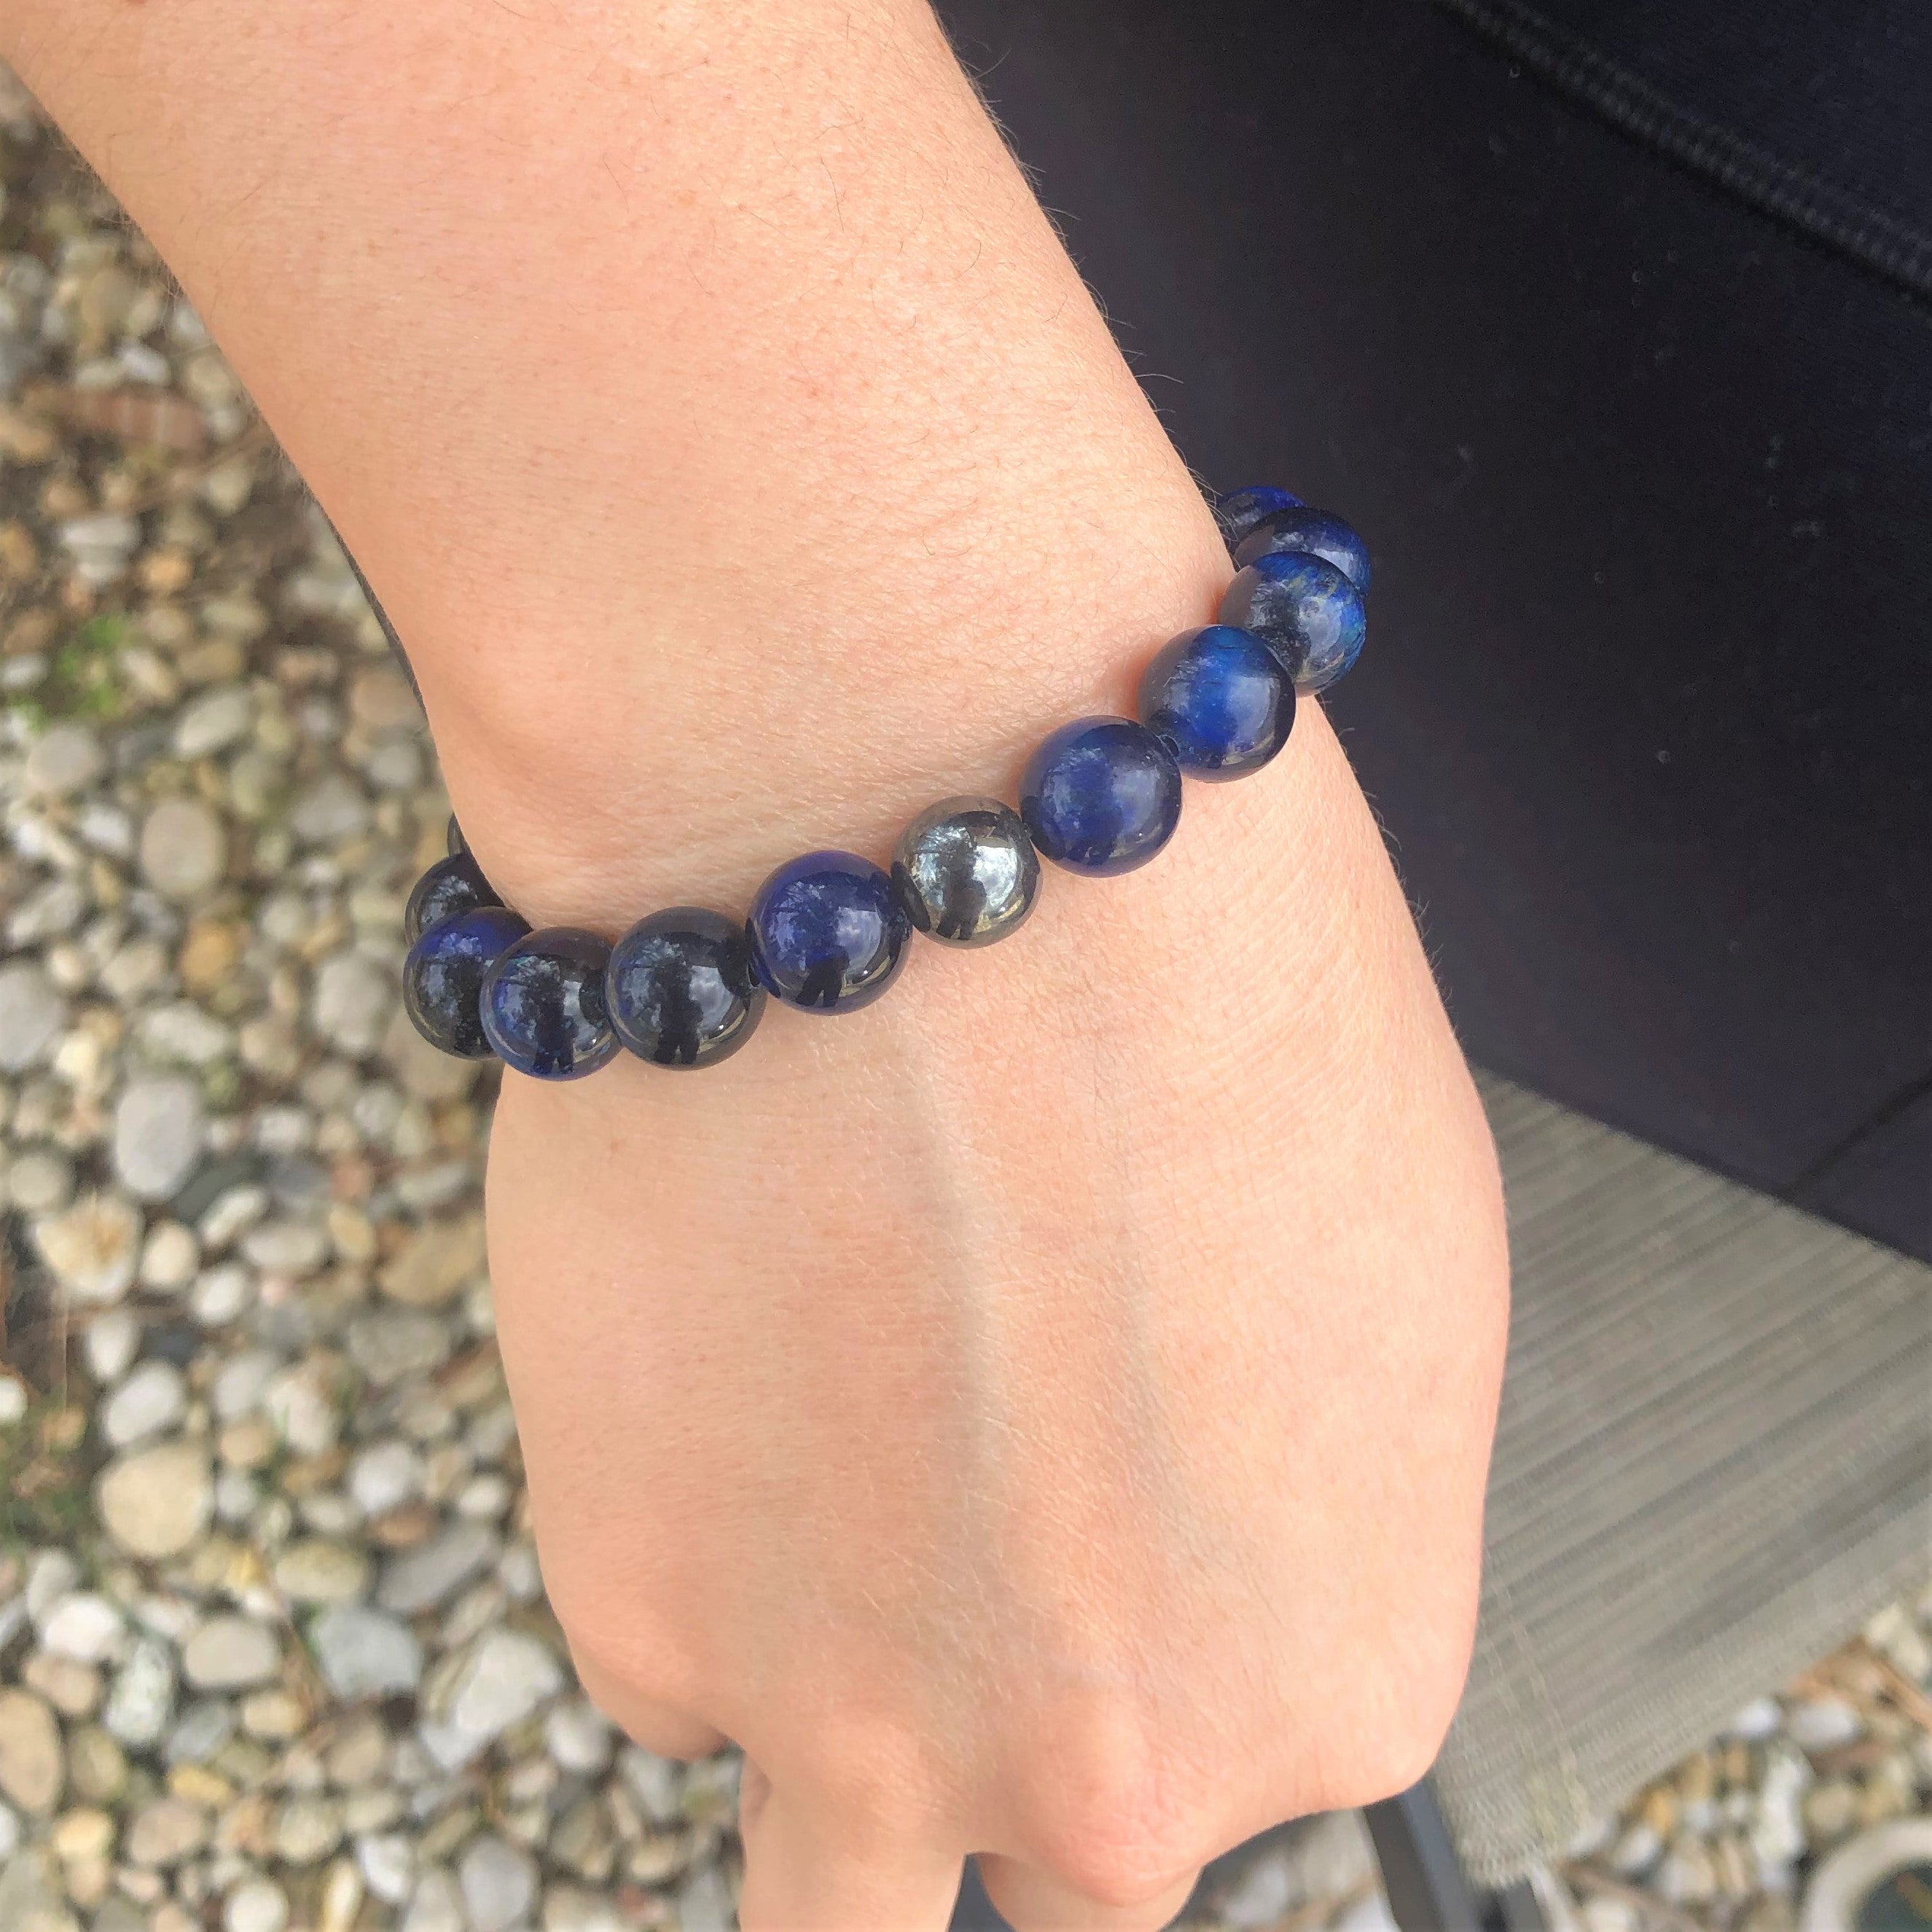 10mm Blue Tiger's Eye Beaded Bracelet with Hematite Accent Bead